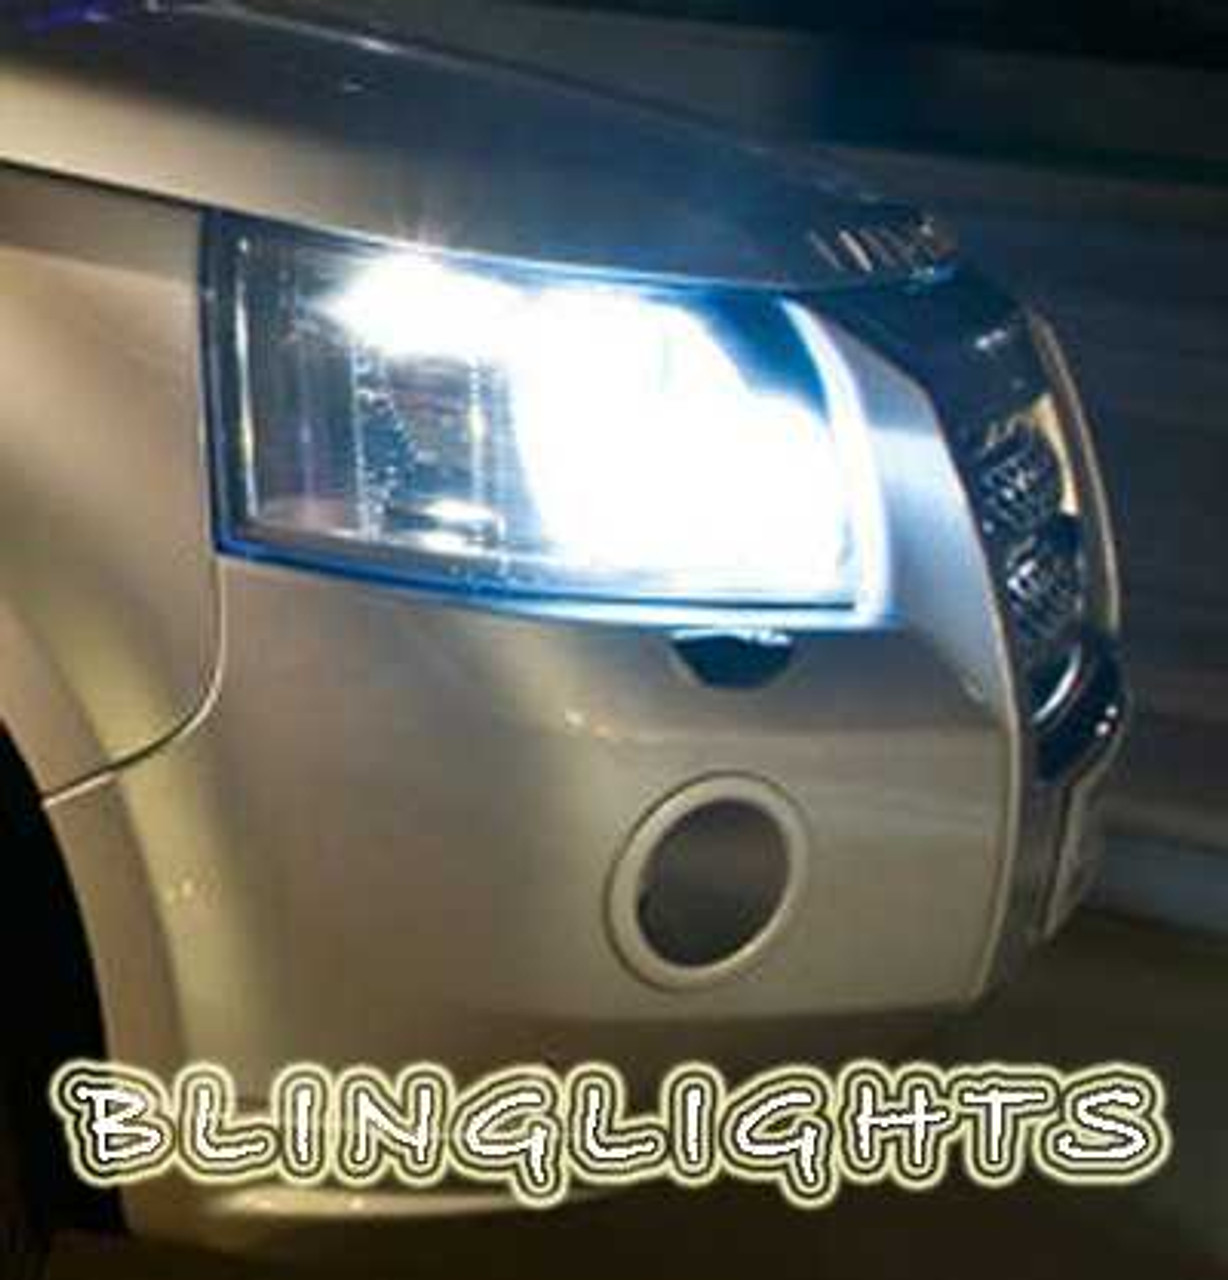 Land Rover LR2 Freelander 2 Xenon HID Conversion Kit for Headlamps Headlights Head Lamps HIDs Lights